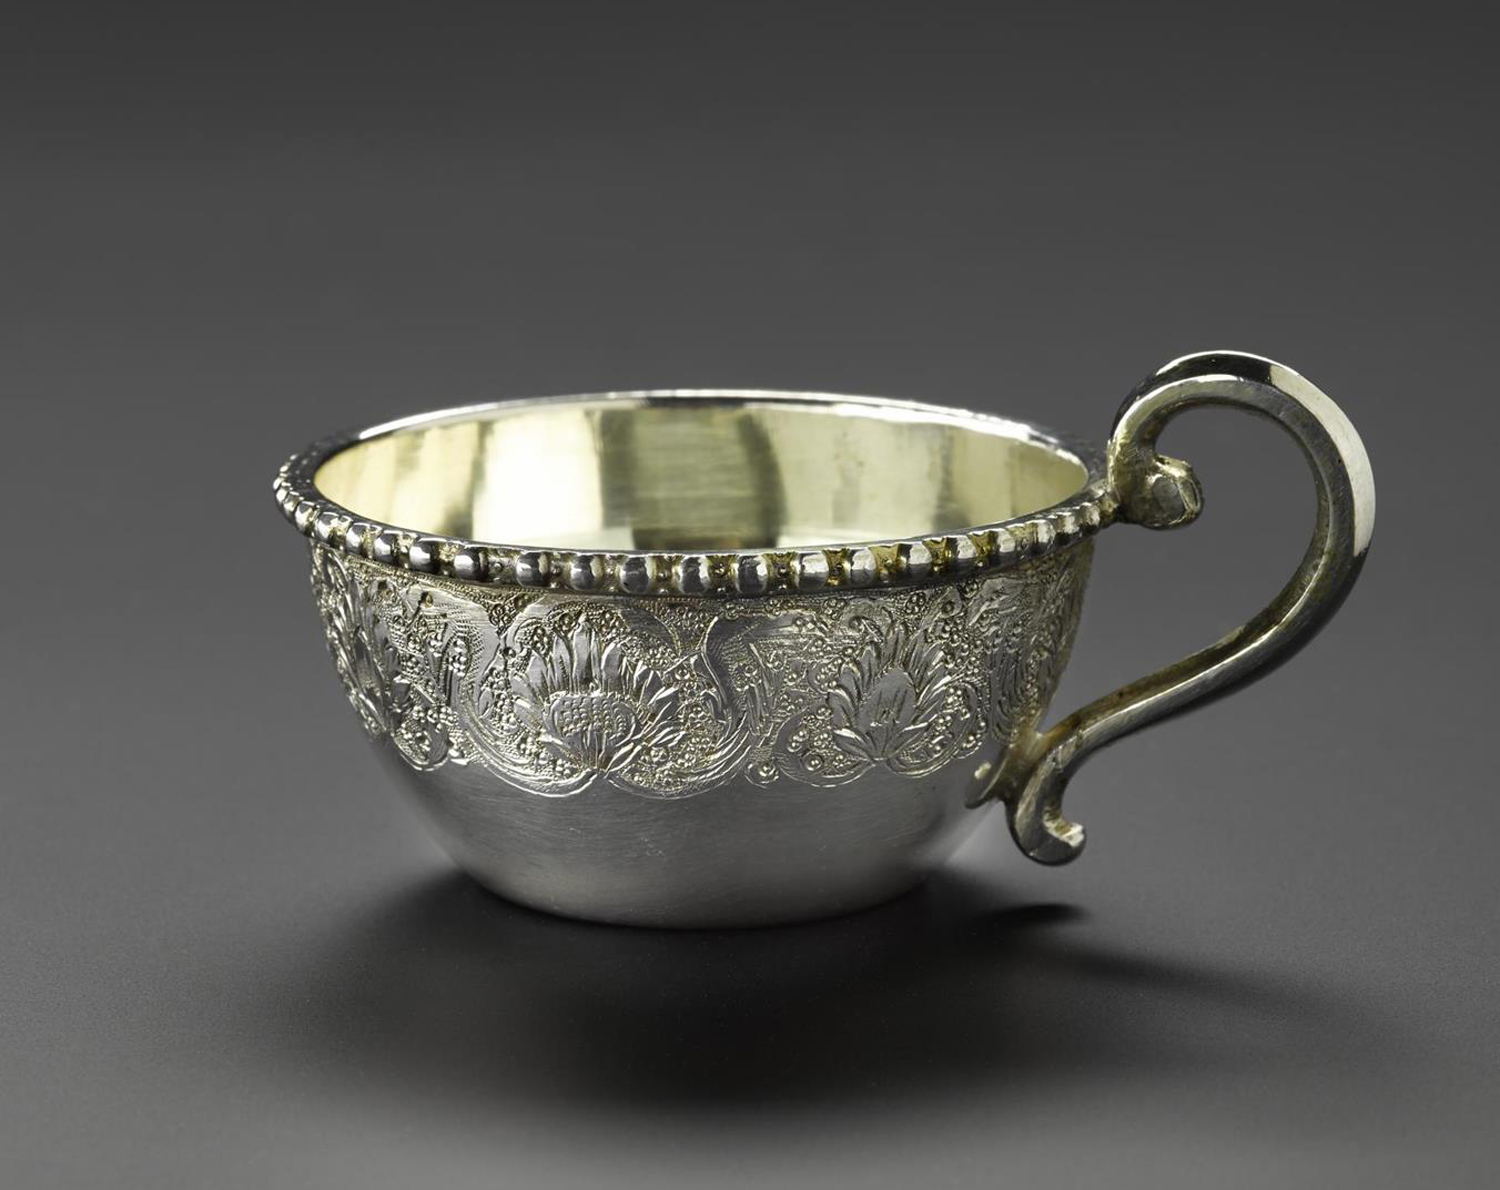 Miniature tea cup holder made of silver, with a handle at one side and floral decoration around the outside, part of a set with a saucer and a spoon, hallmarked on the bottom, Iran, probably Isfahan, 1920s-1940s, acc. no V.2015.68.1